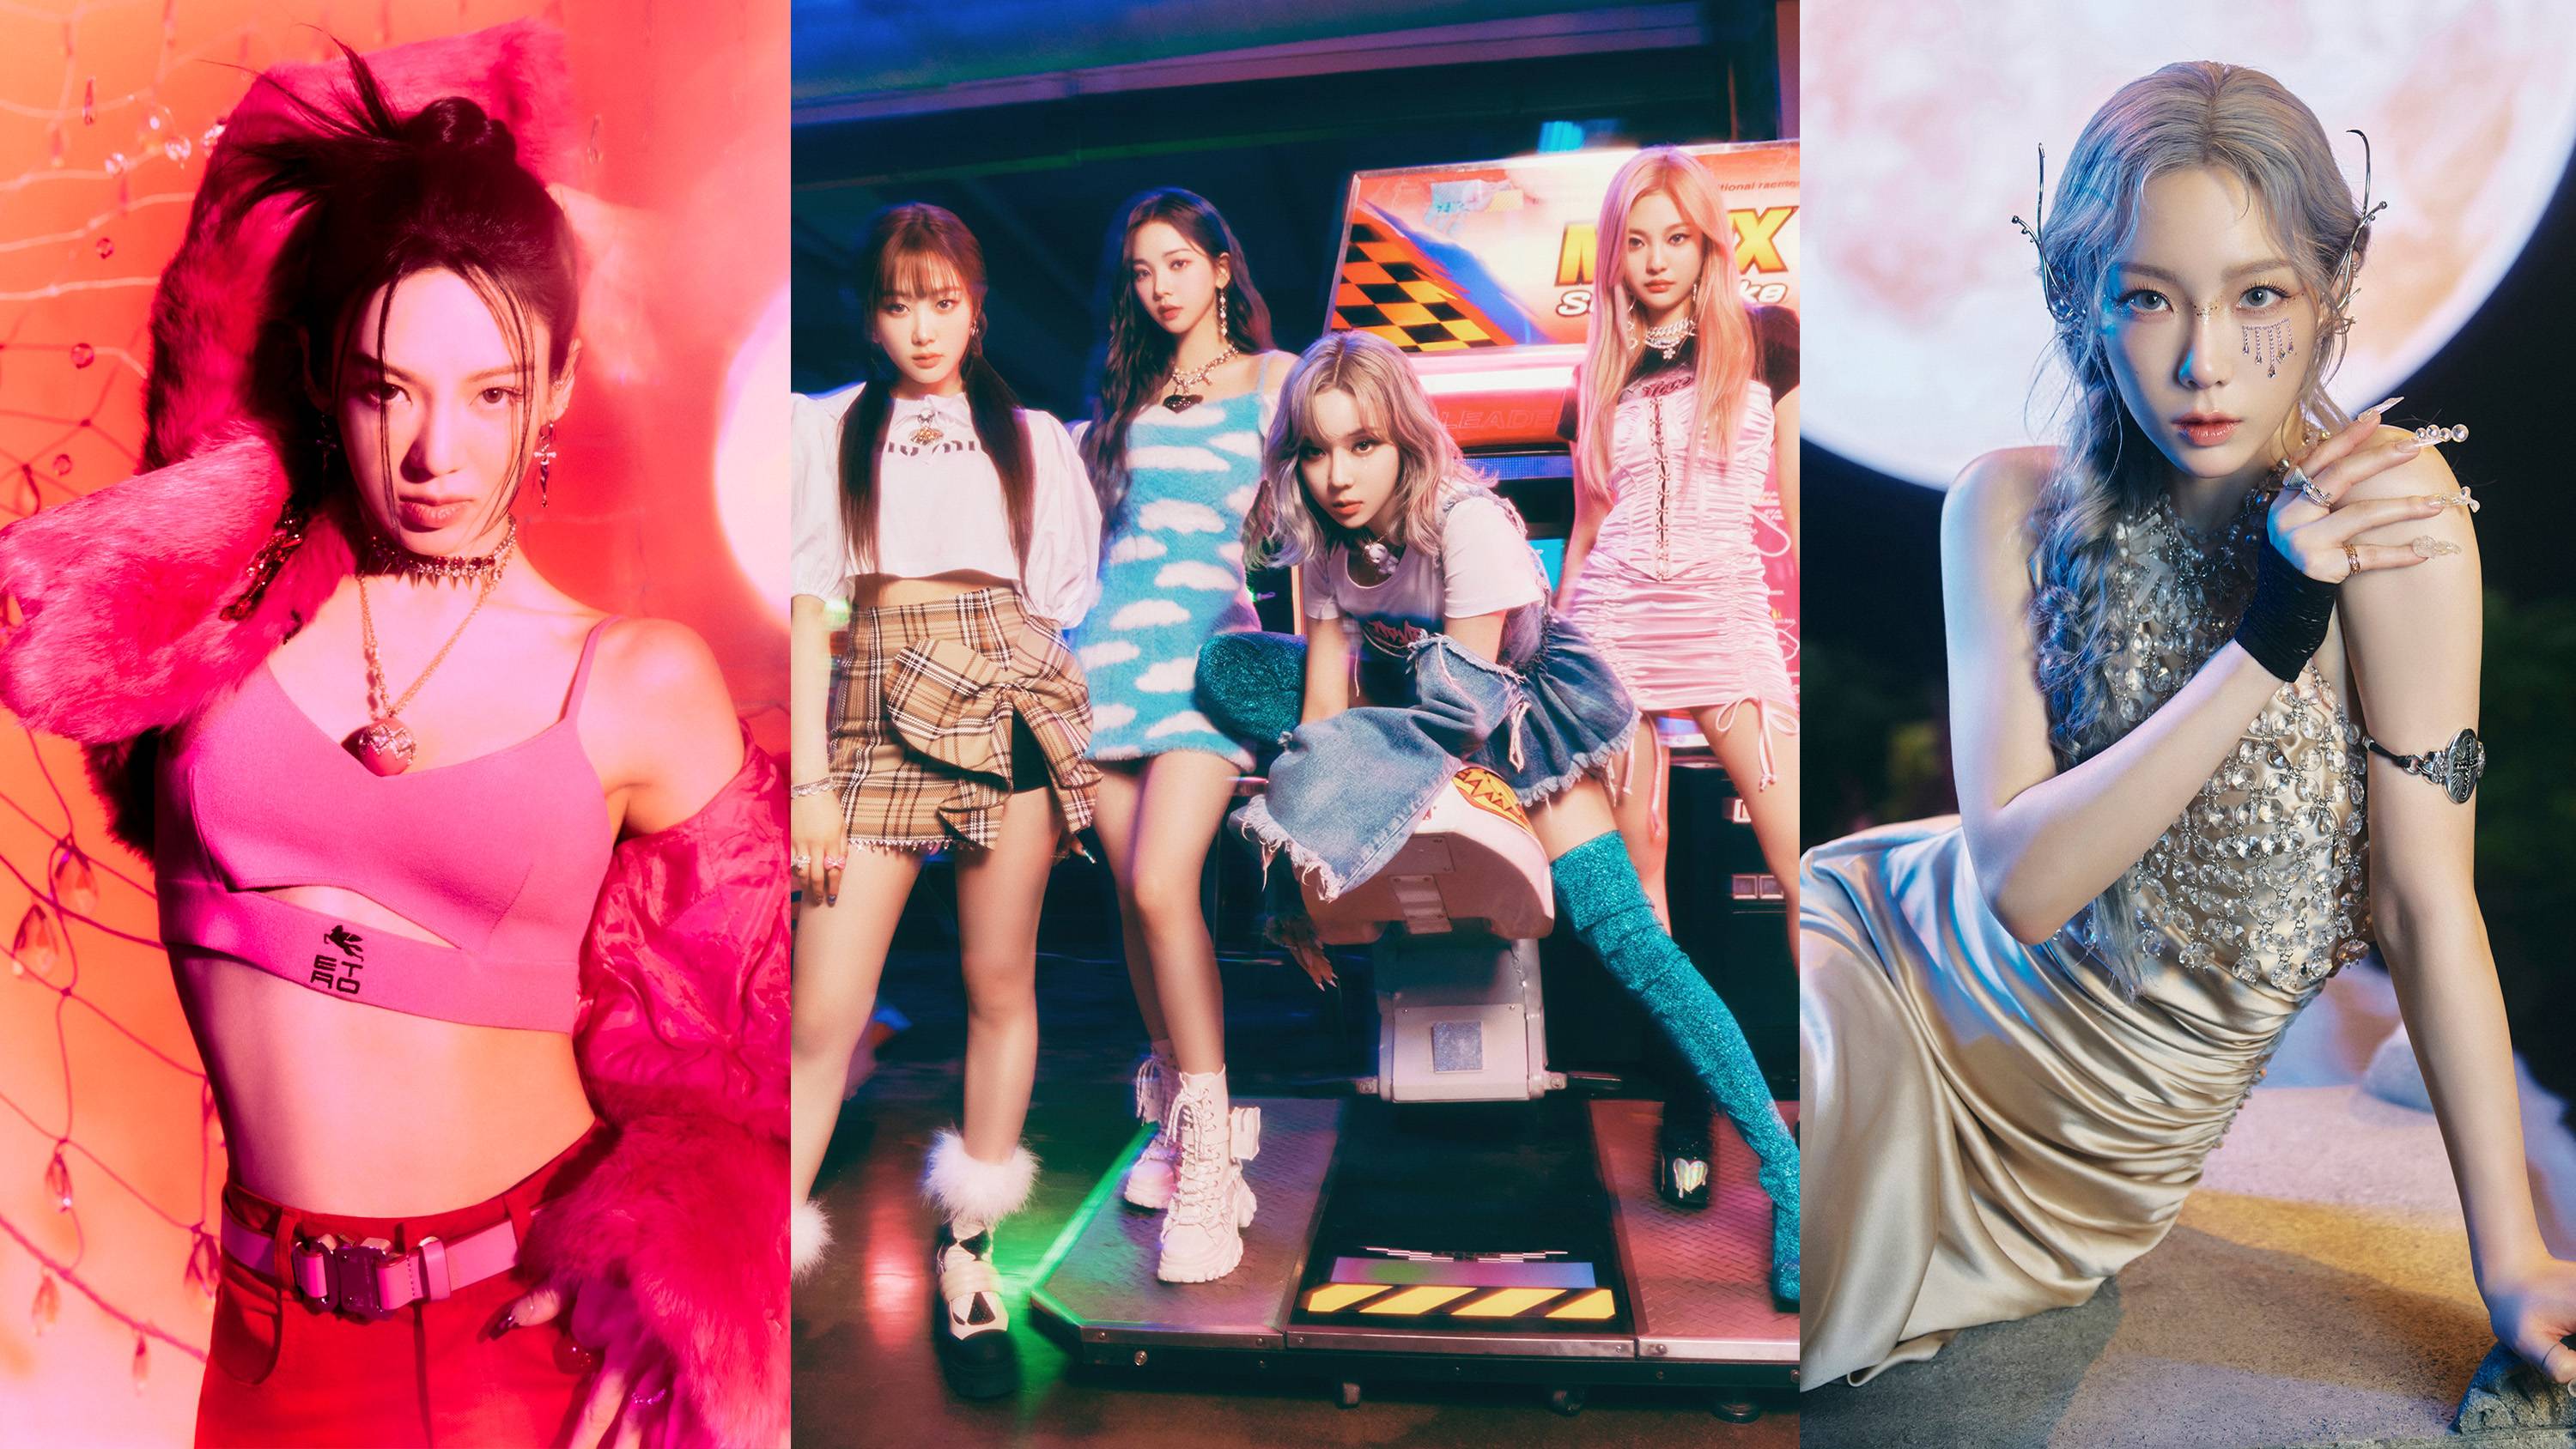 Twice and K/DA have a song collab in the upcoming 'All Out' EP